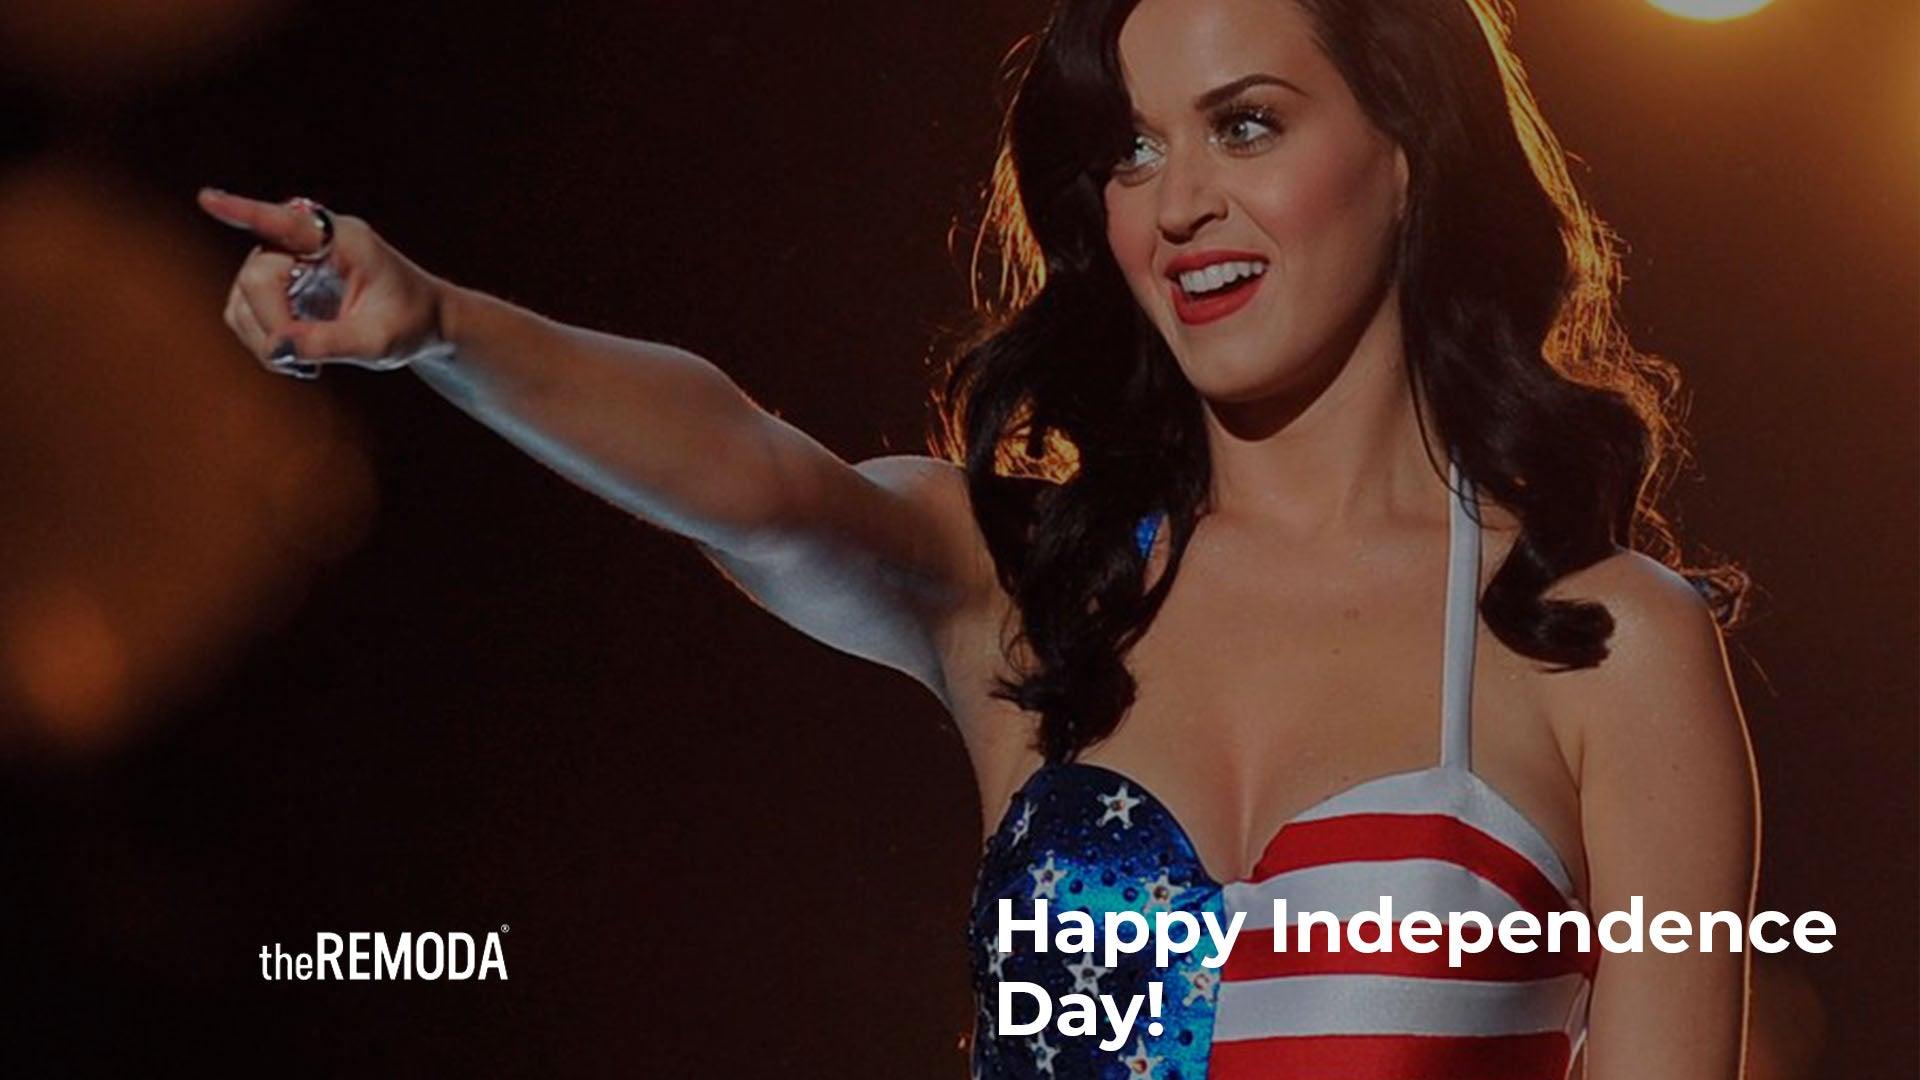 Happy 4th of July! - theREMODA